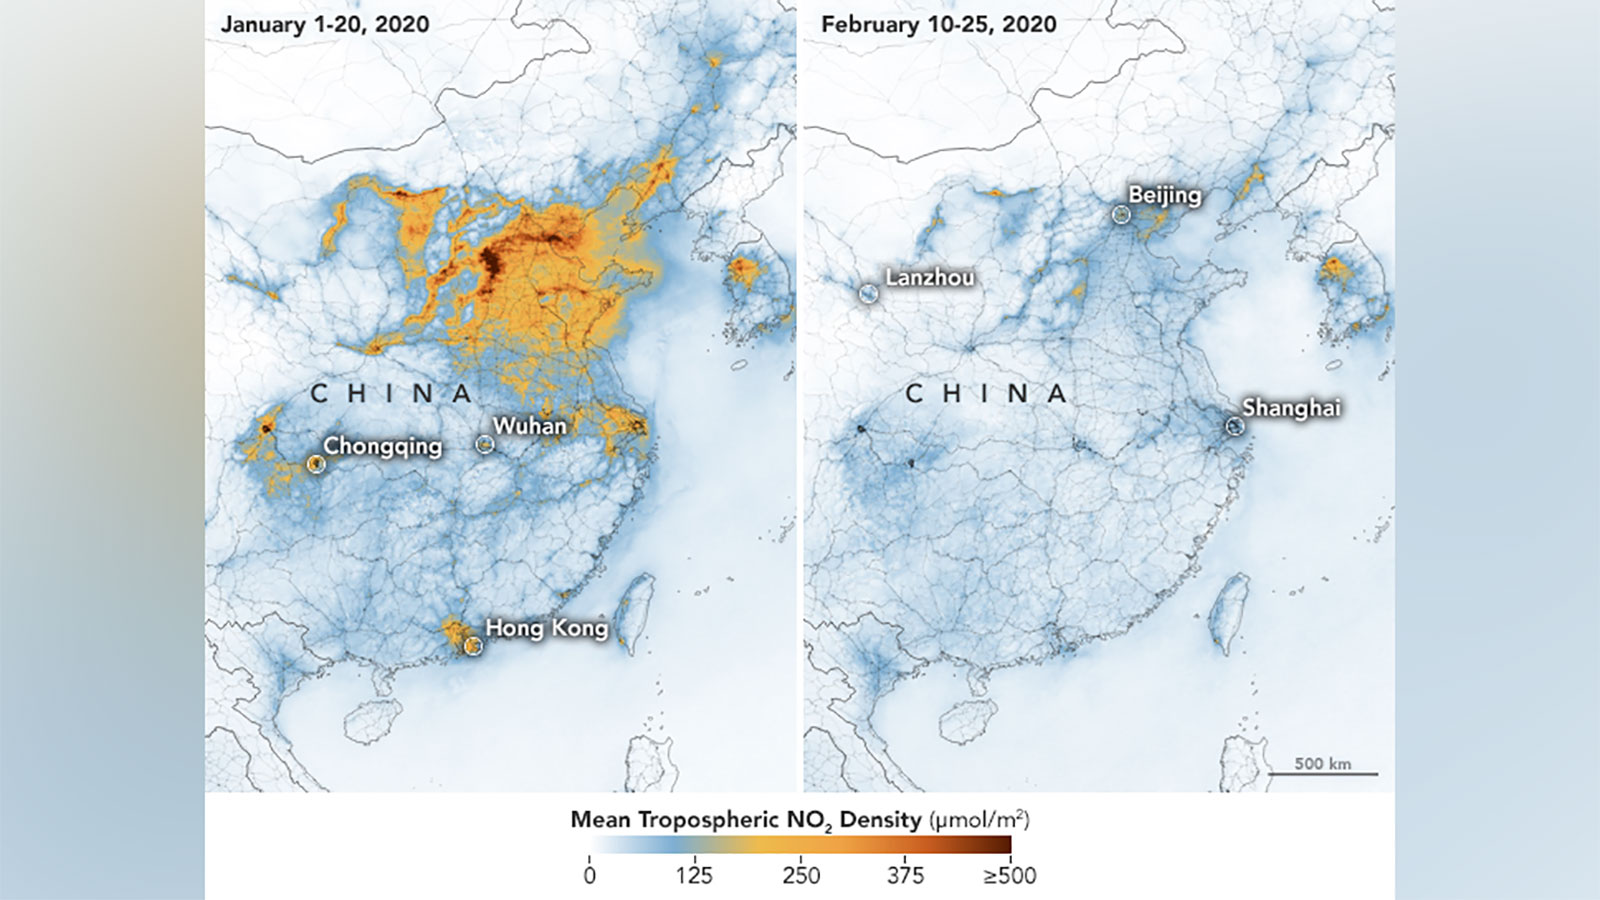 The satellite images have detected a significantdecreases in nitrogen dioxide over China.